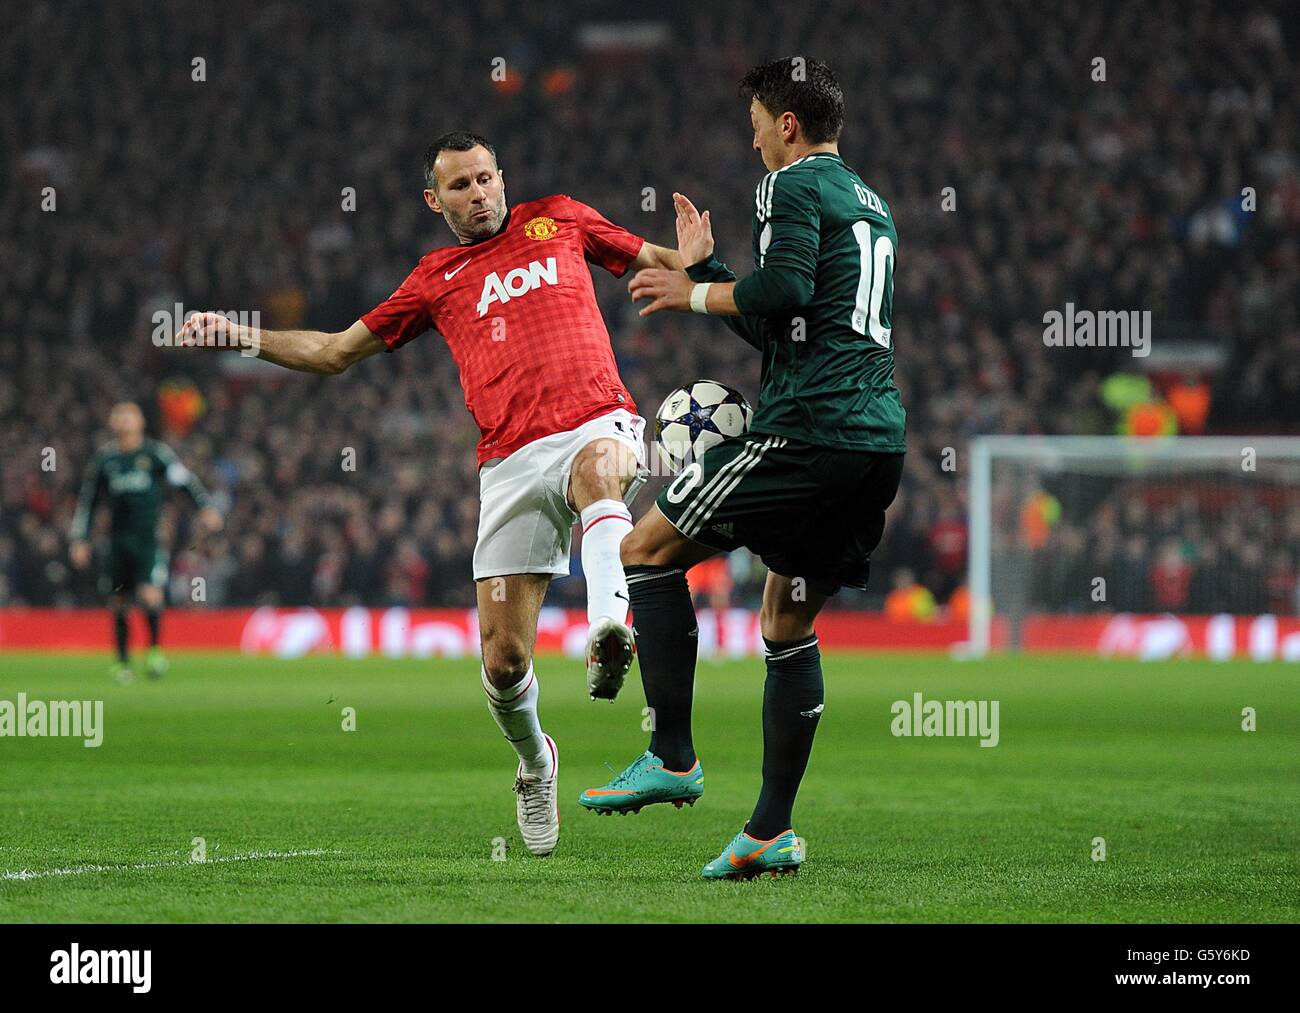 Real Madrid's Mesut Ozil (right) and Manchester United's Ryan Giggs battle for the ball Stock Photo